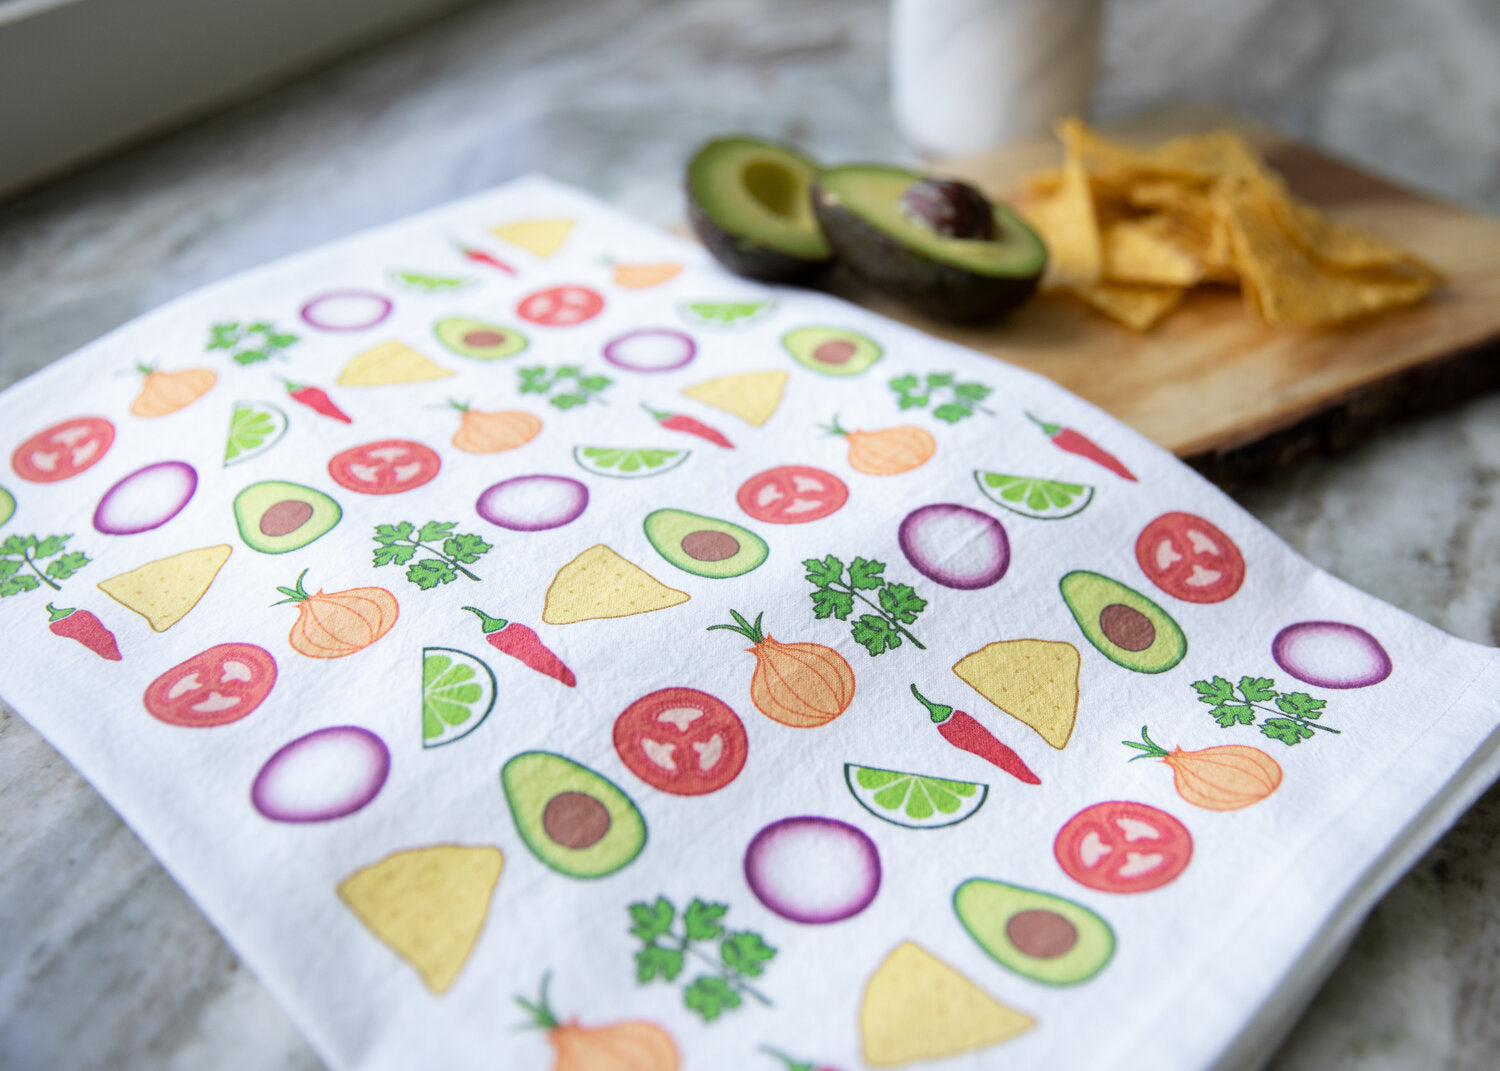 Images of peppers, lime, guacamole, onions and cilantro with tomatoes are printed on this cute flour sack hand towel.